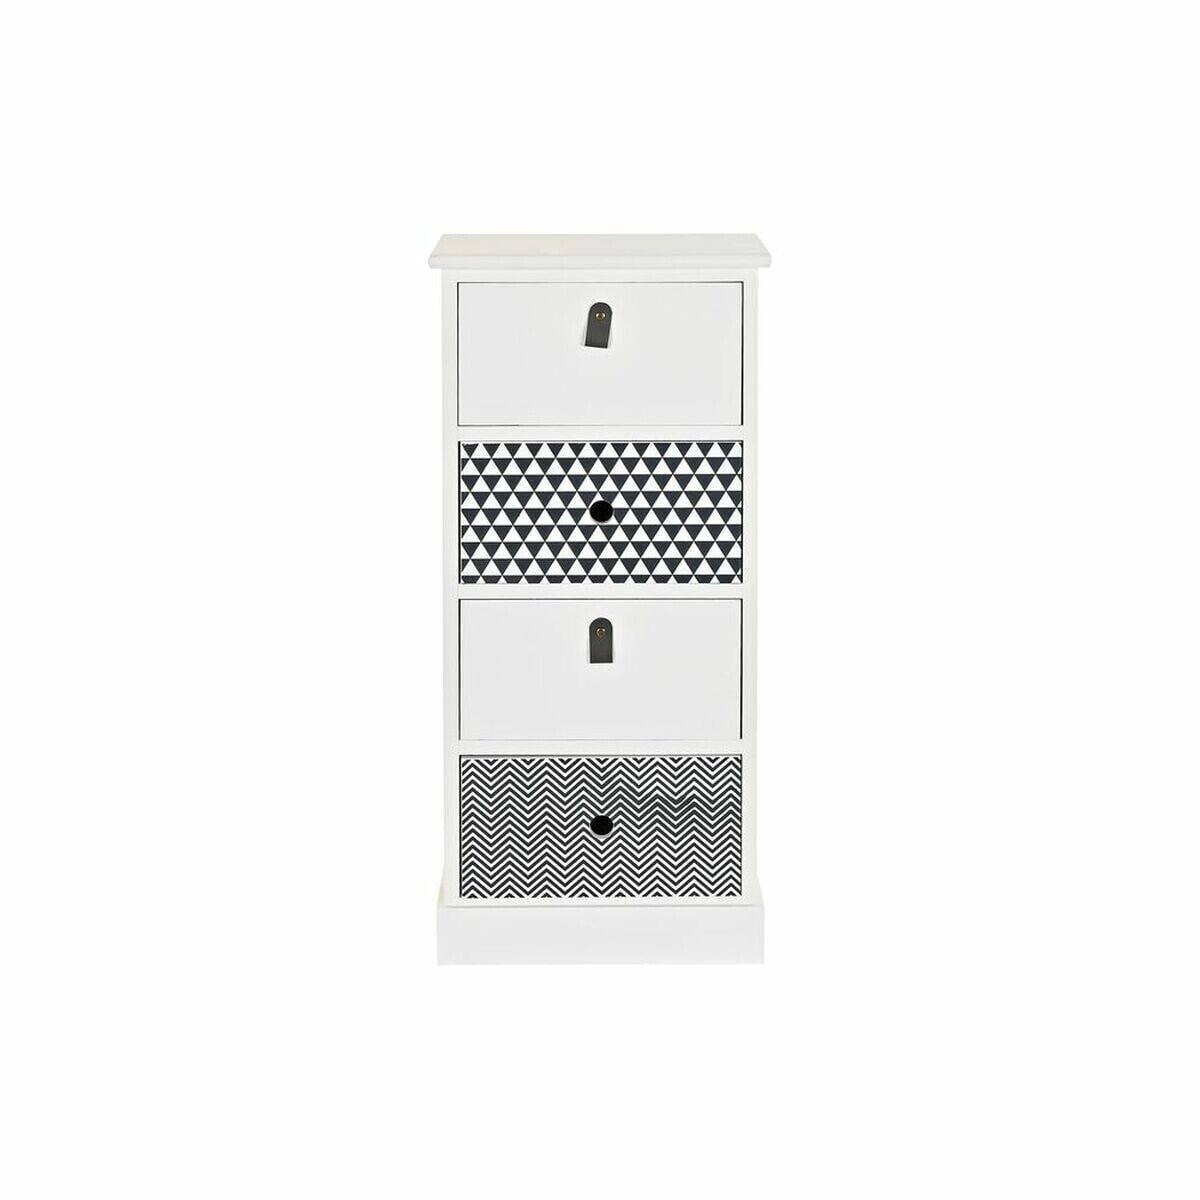 Chest of drawers DKD Home Decor Grey White Paolownia wood (36 x 25 x 79 cm)